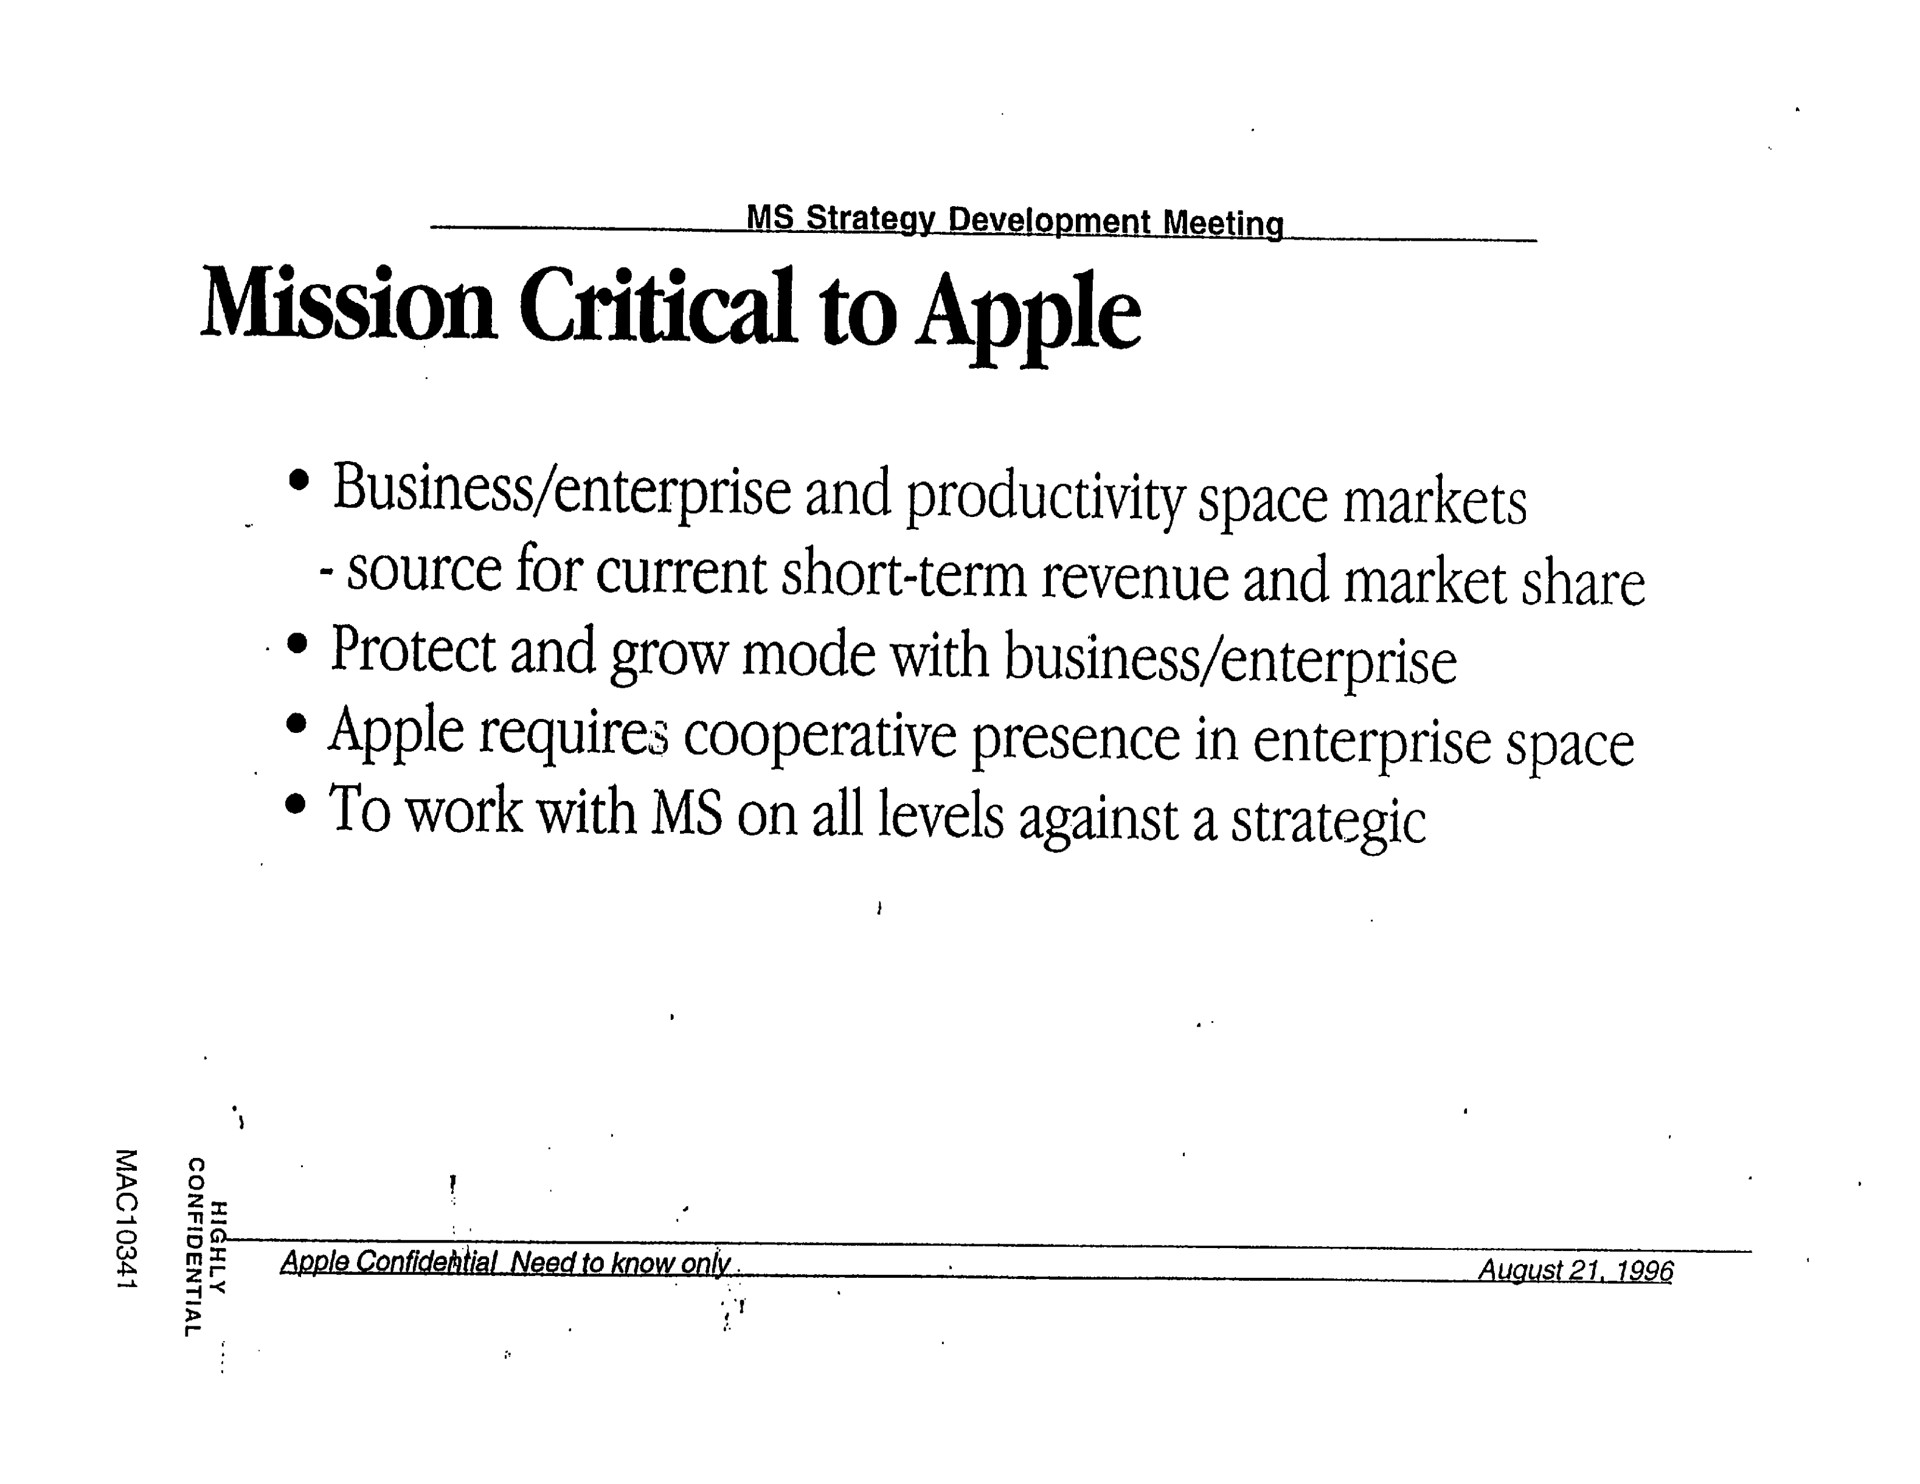 mission critical to apple business enterprise and productivity space markets source for current short term revenue and market share protect and grow mode with business enterprise apple requires presence in enterprise space to work with on all levels against a strategic | Apple